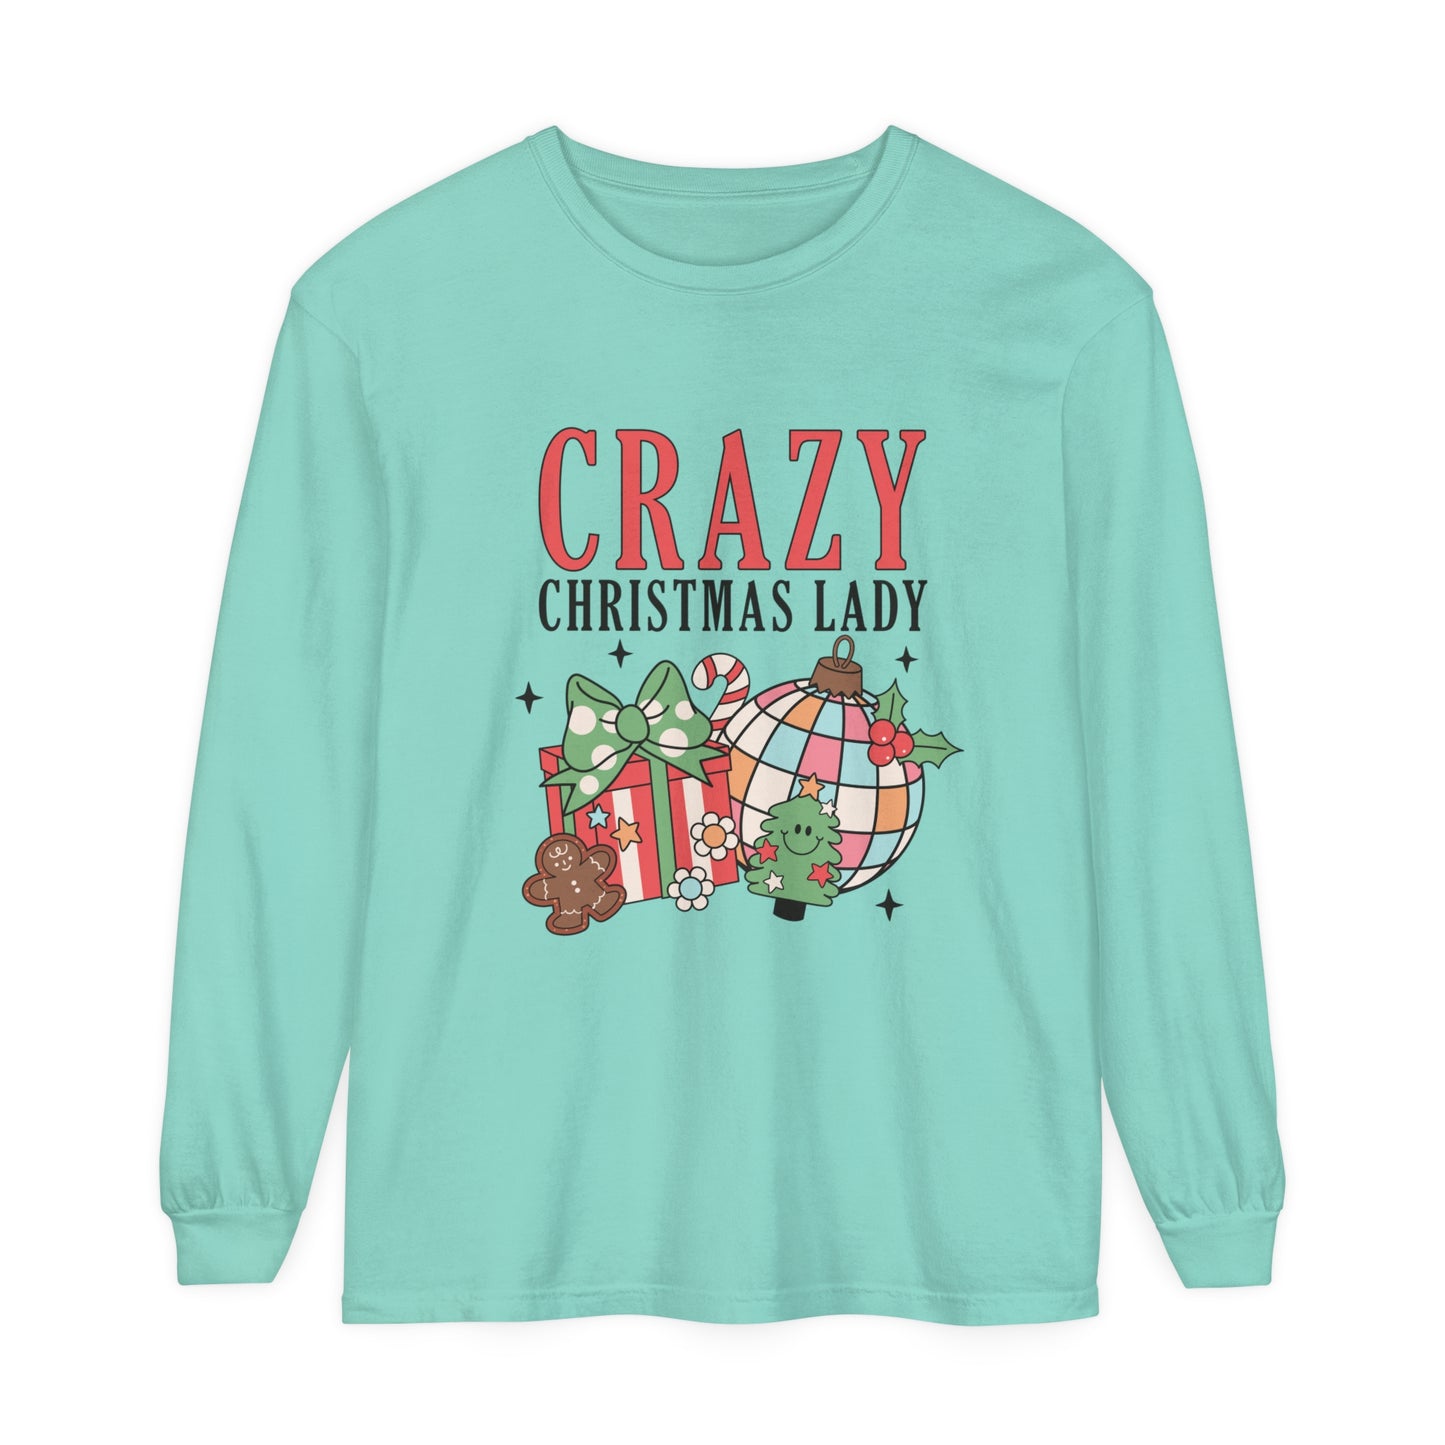 Crazy Christmas Lady Women's Christmas Holiday Loose Long Sleeve T-Shirt